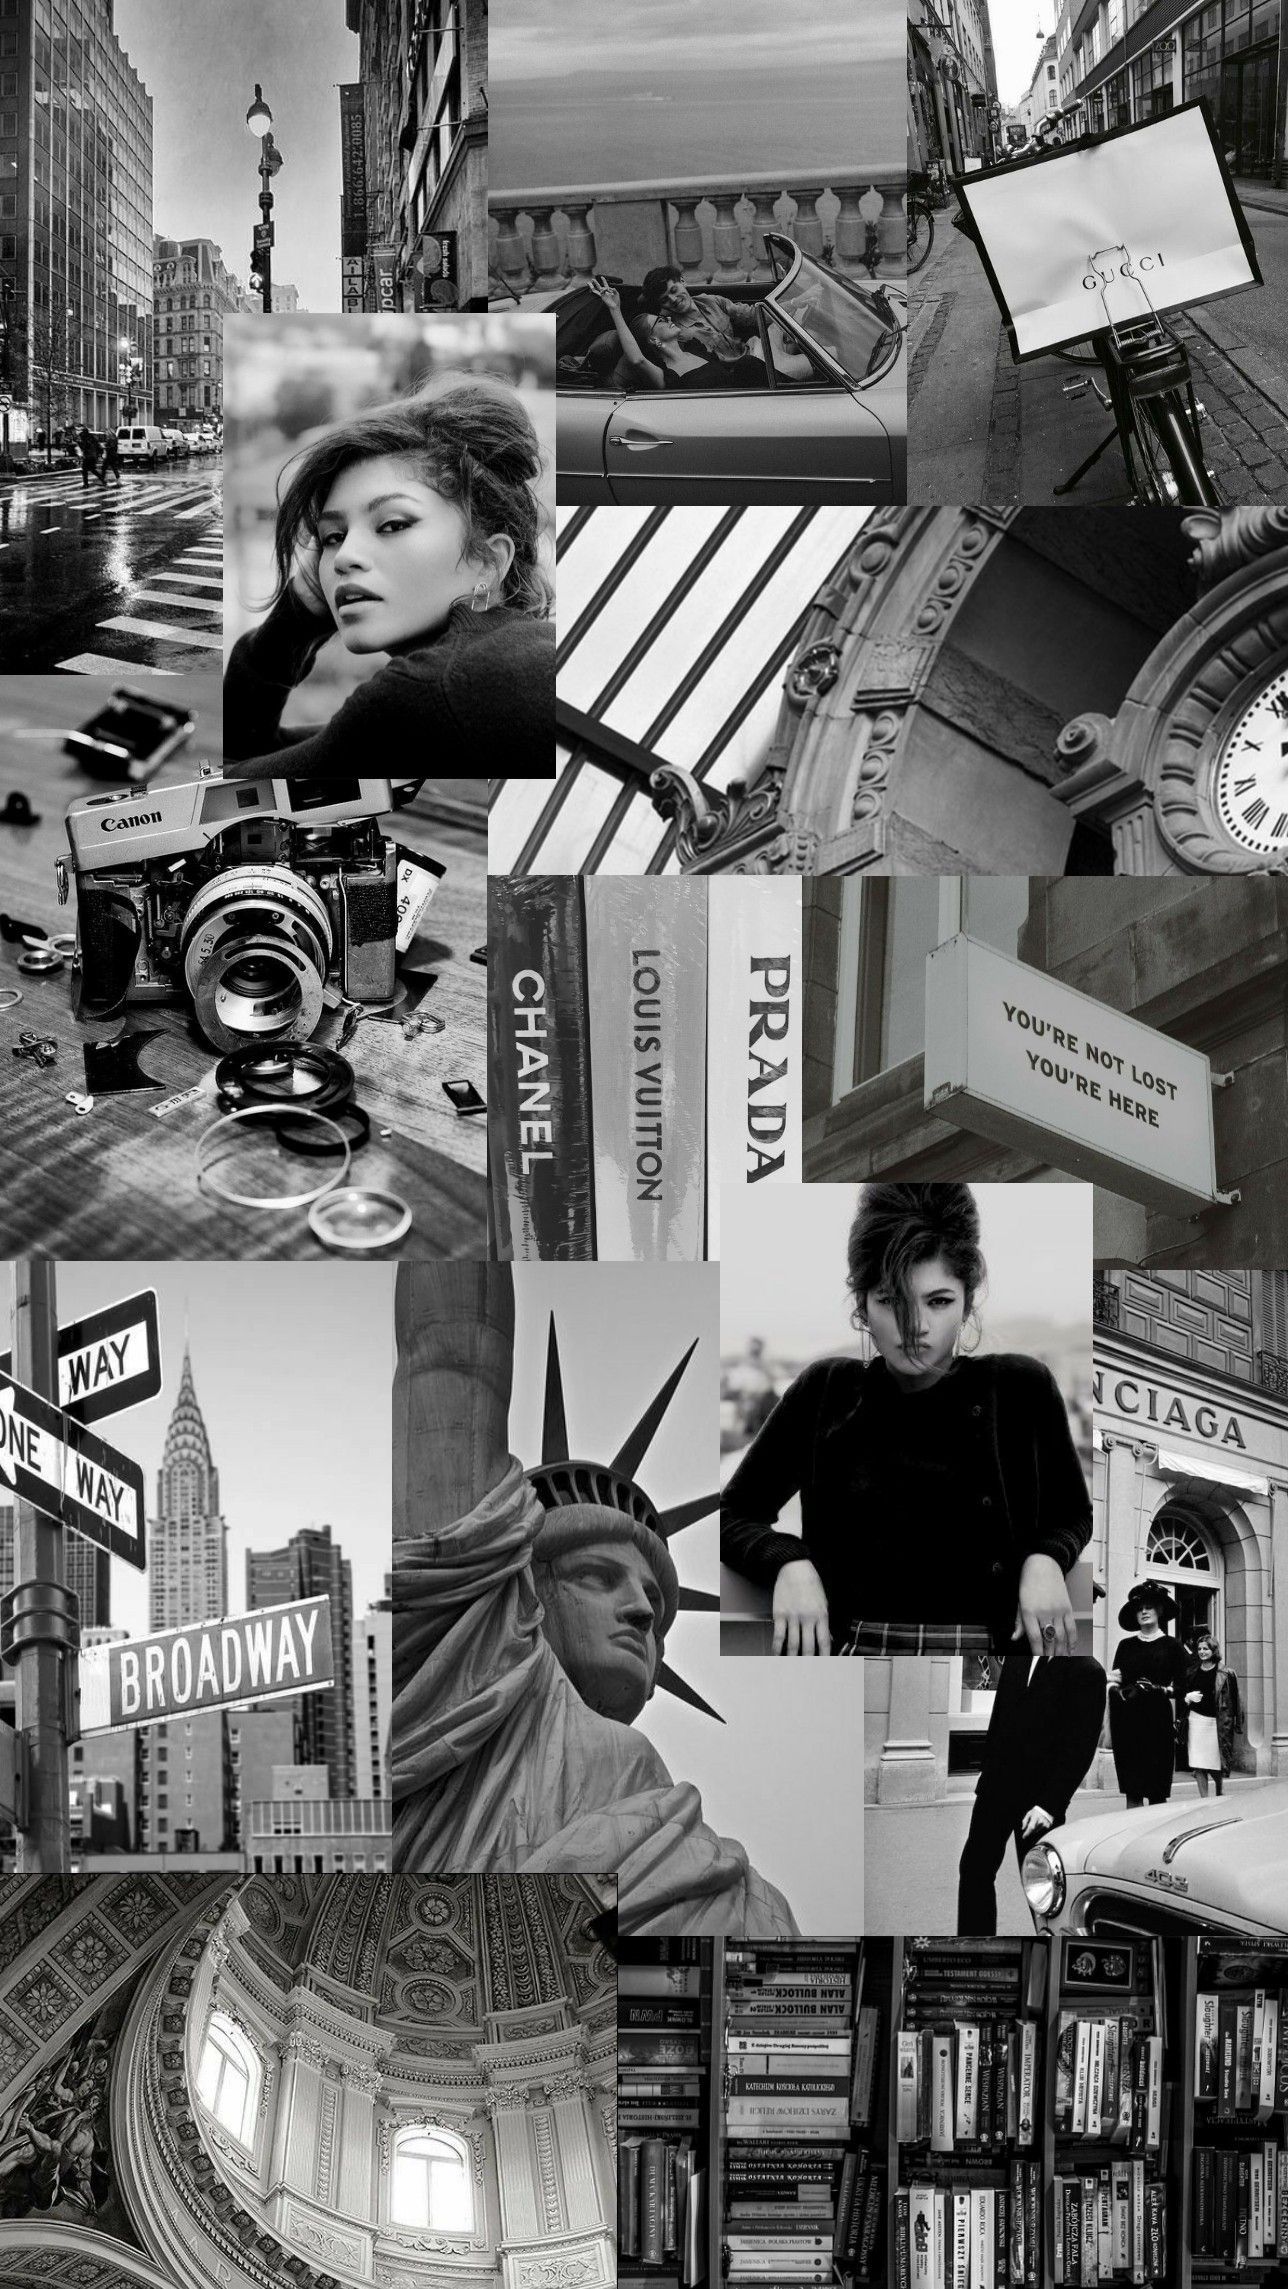 A collage of pictures with the statue in them - Broadway